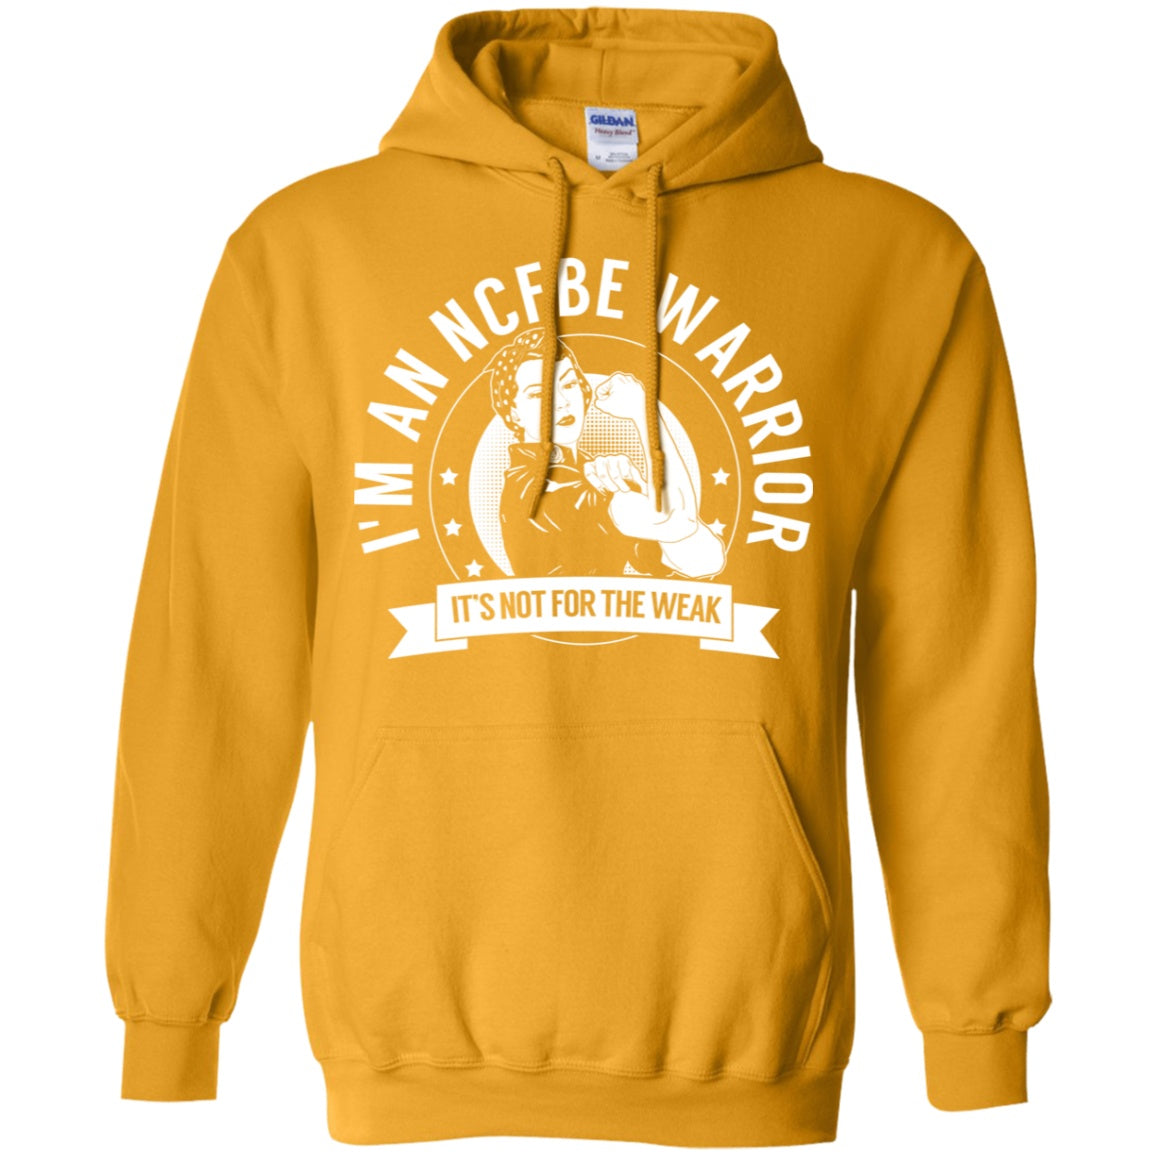 Non-cystic fibrosis bronchiectasis -  NCFBE Warrior NFTW Pullover Hoodie 8 oz. - The Unchargeables